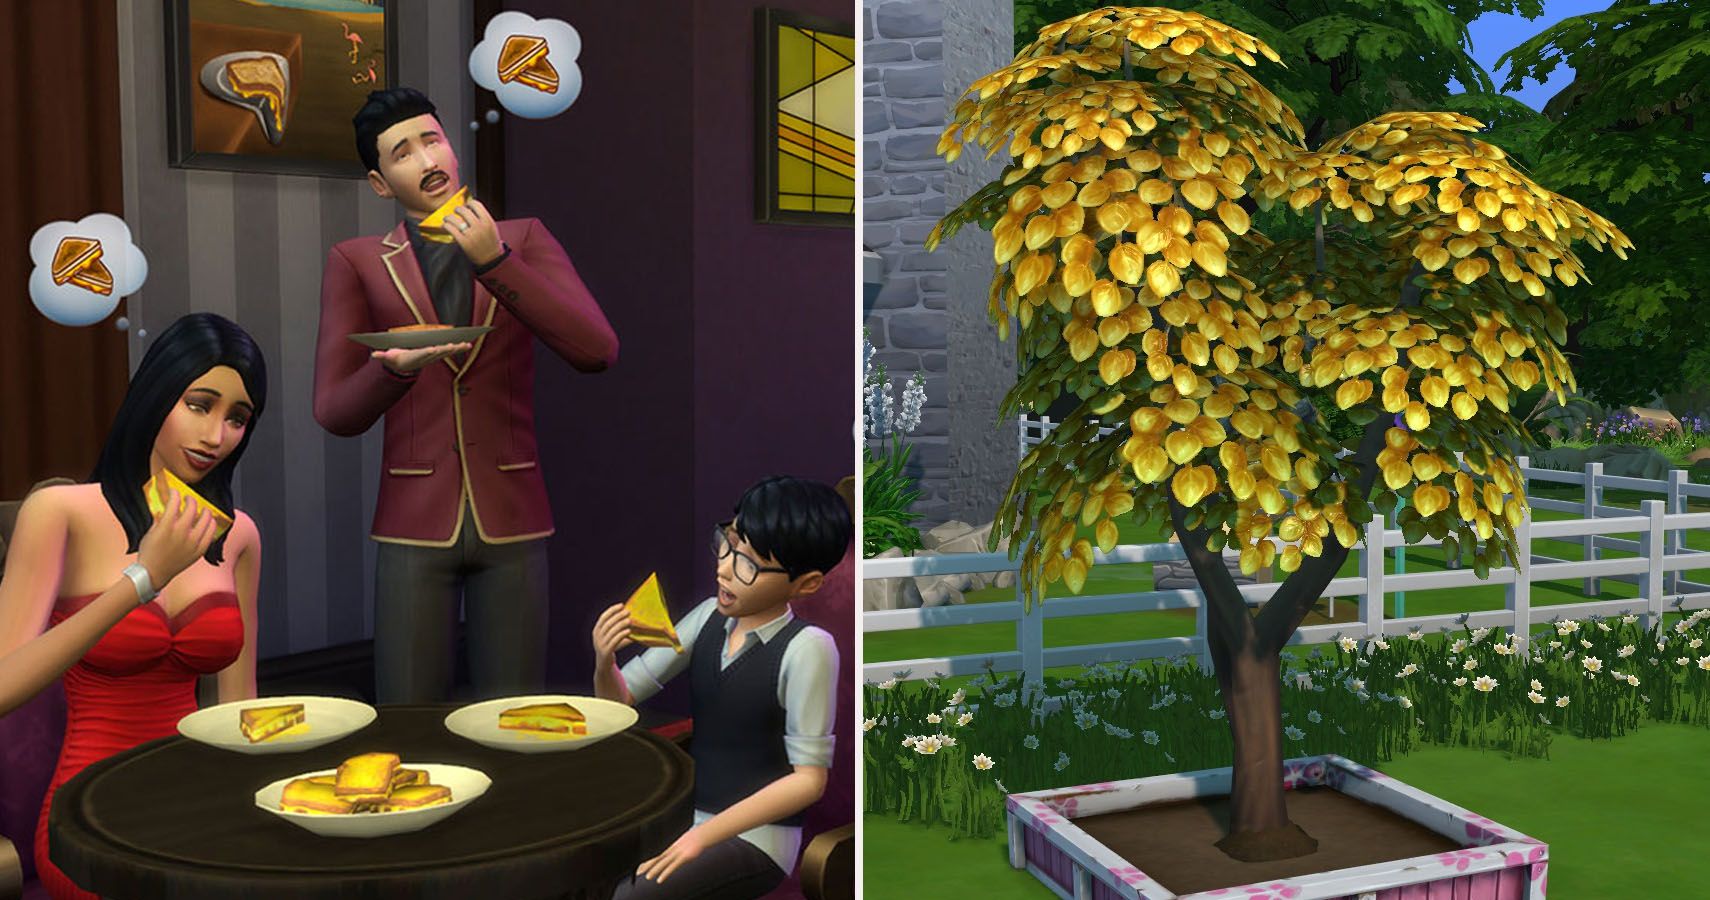 Split image. Left side the goths eating grilled cheese. Right side the Sims 4 money tree in a pot.